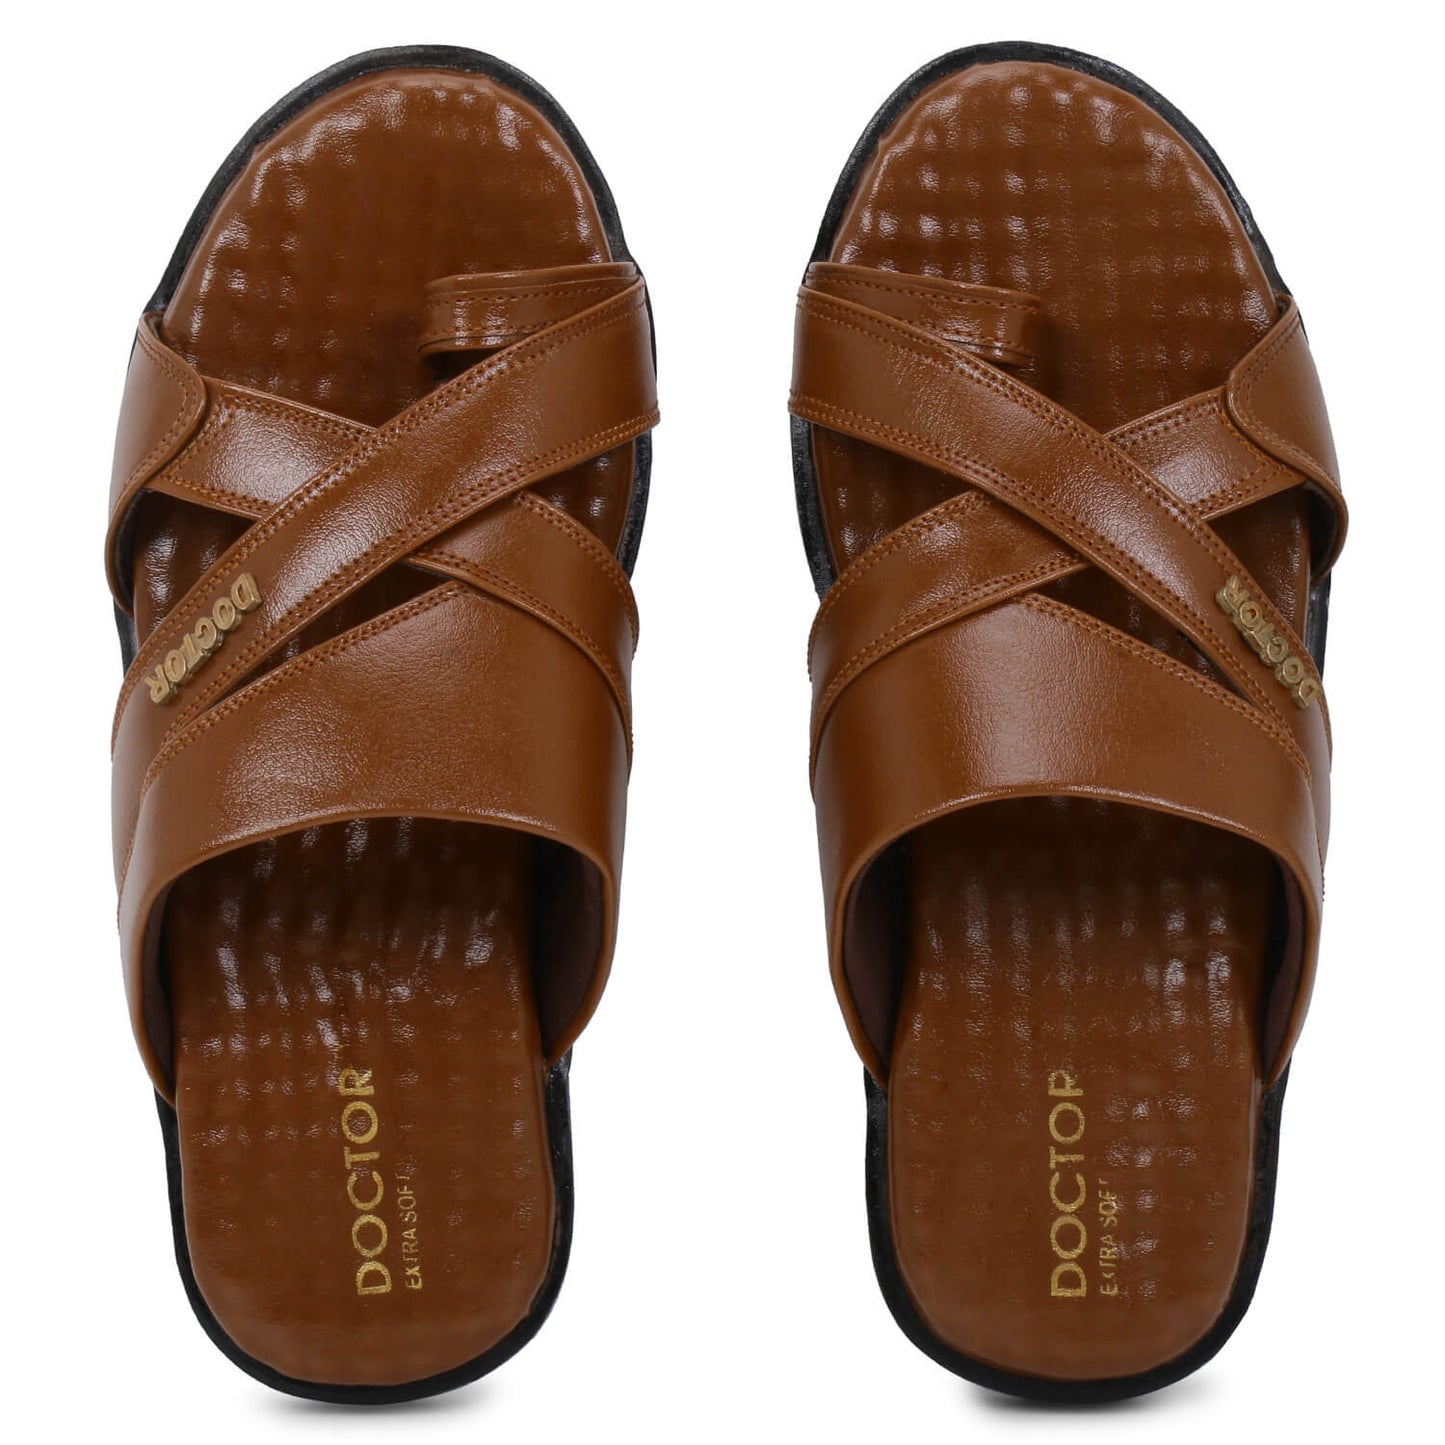 Doctor Extra Soft L-11, Orthopedic Diabetic Skin Freindly Daily Use Casual Wear Stylish Chappal/Sandals for Men's-Gents-Boy's